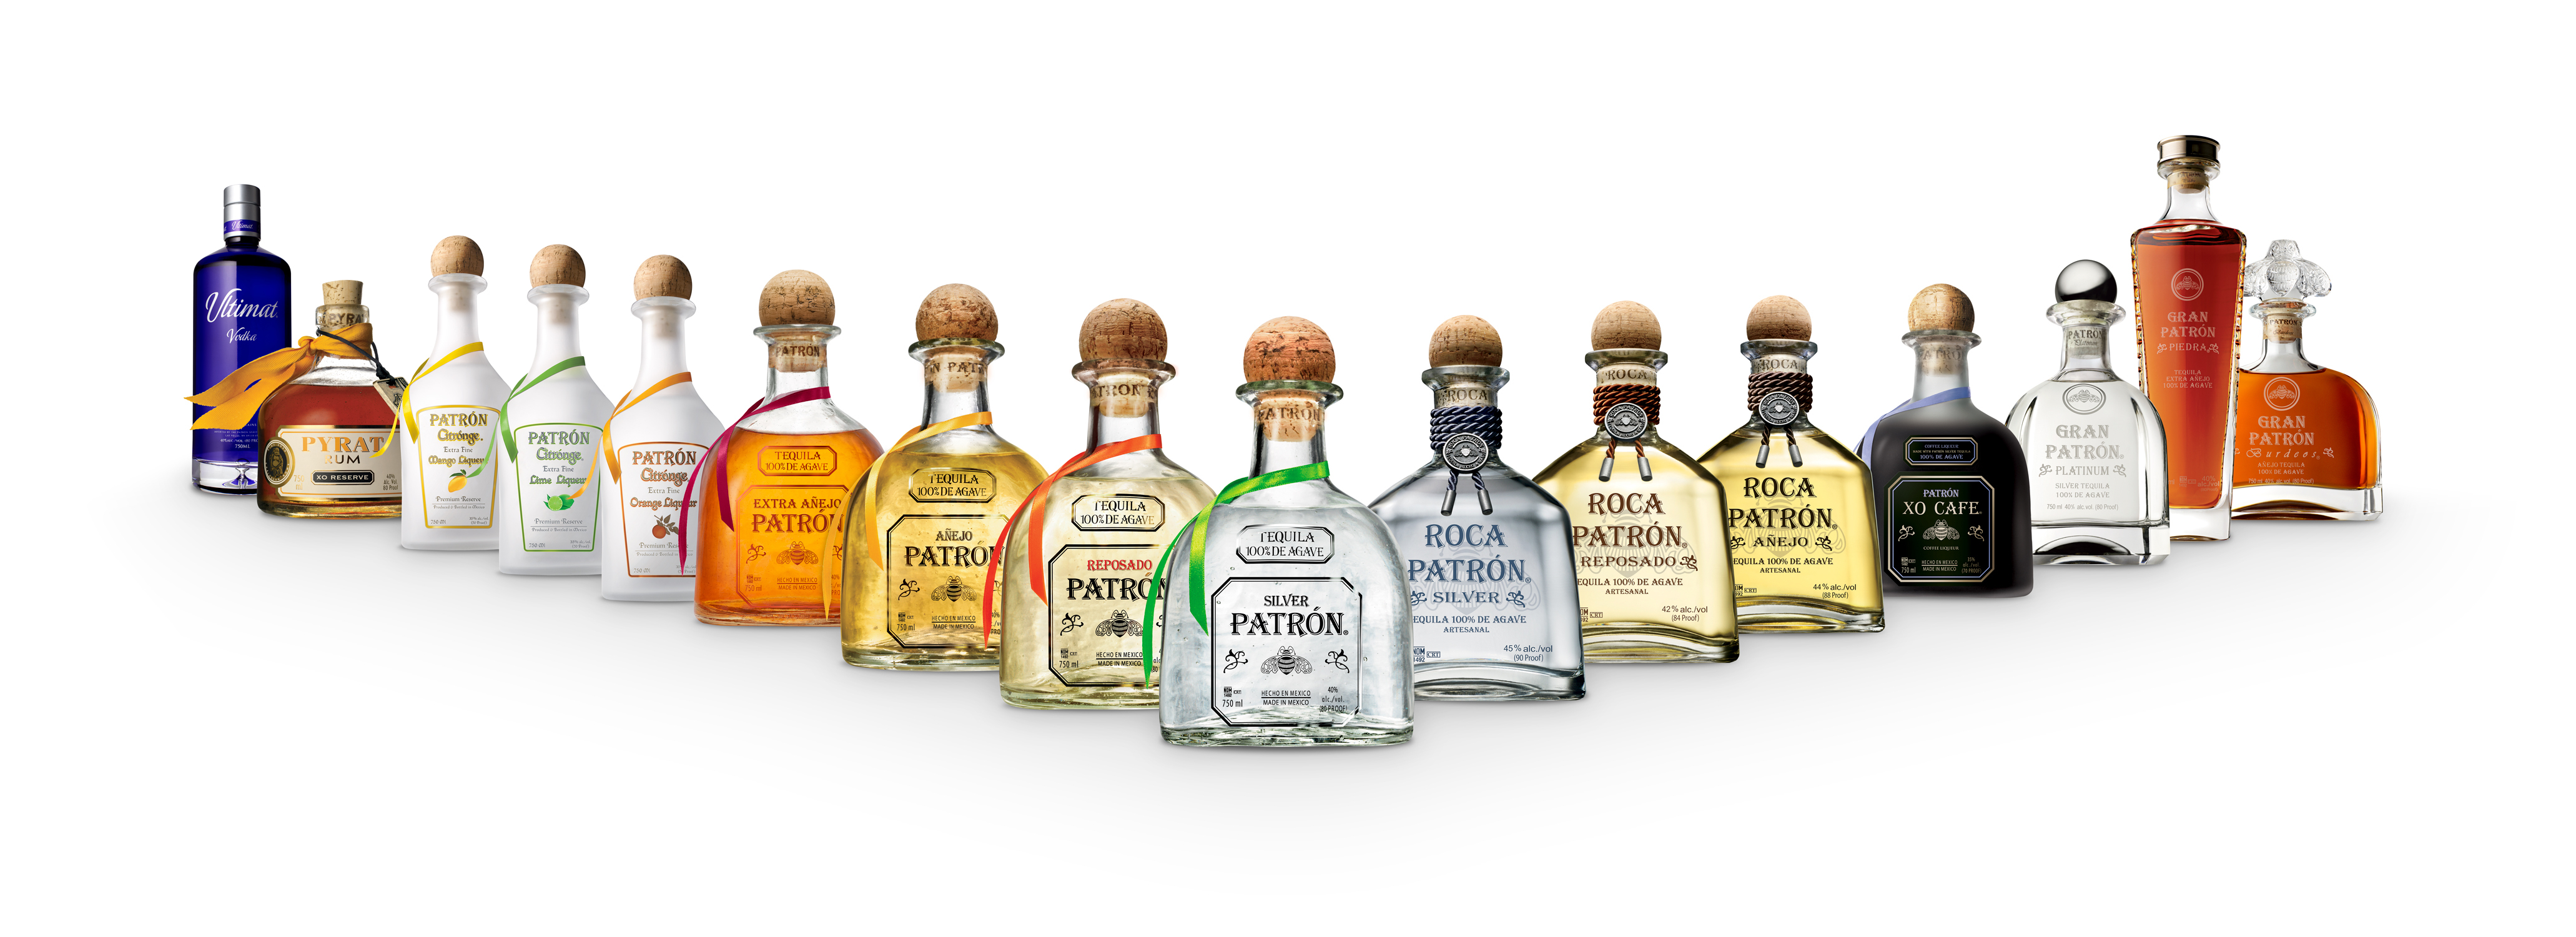 Bacardi to Acquire Patrón Tequila | Business Wire